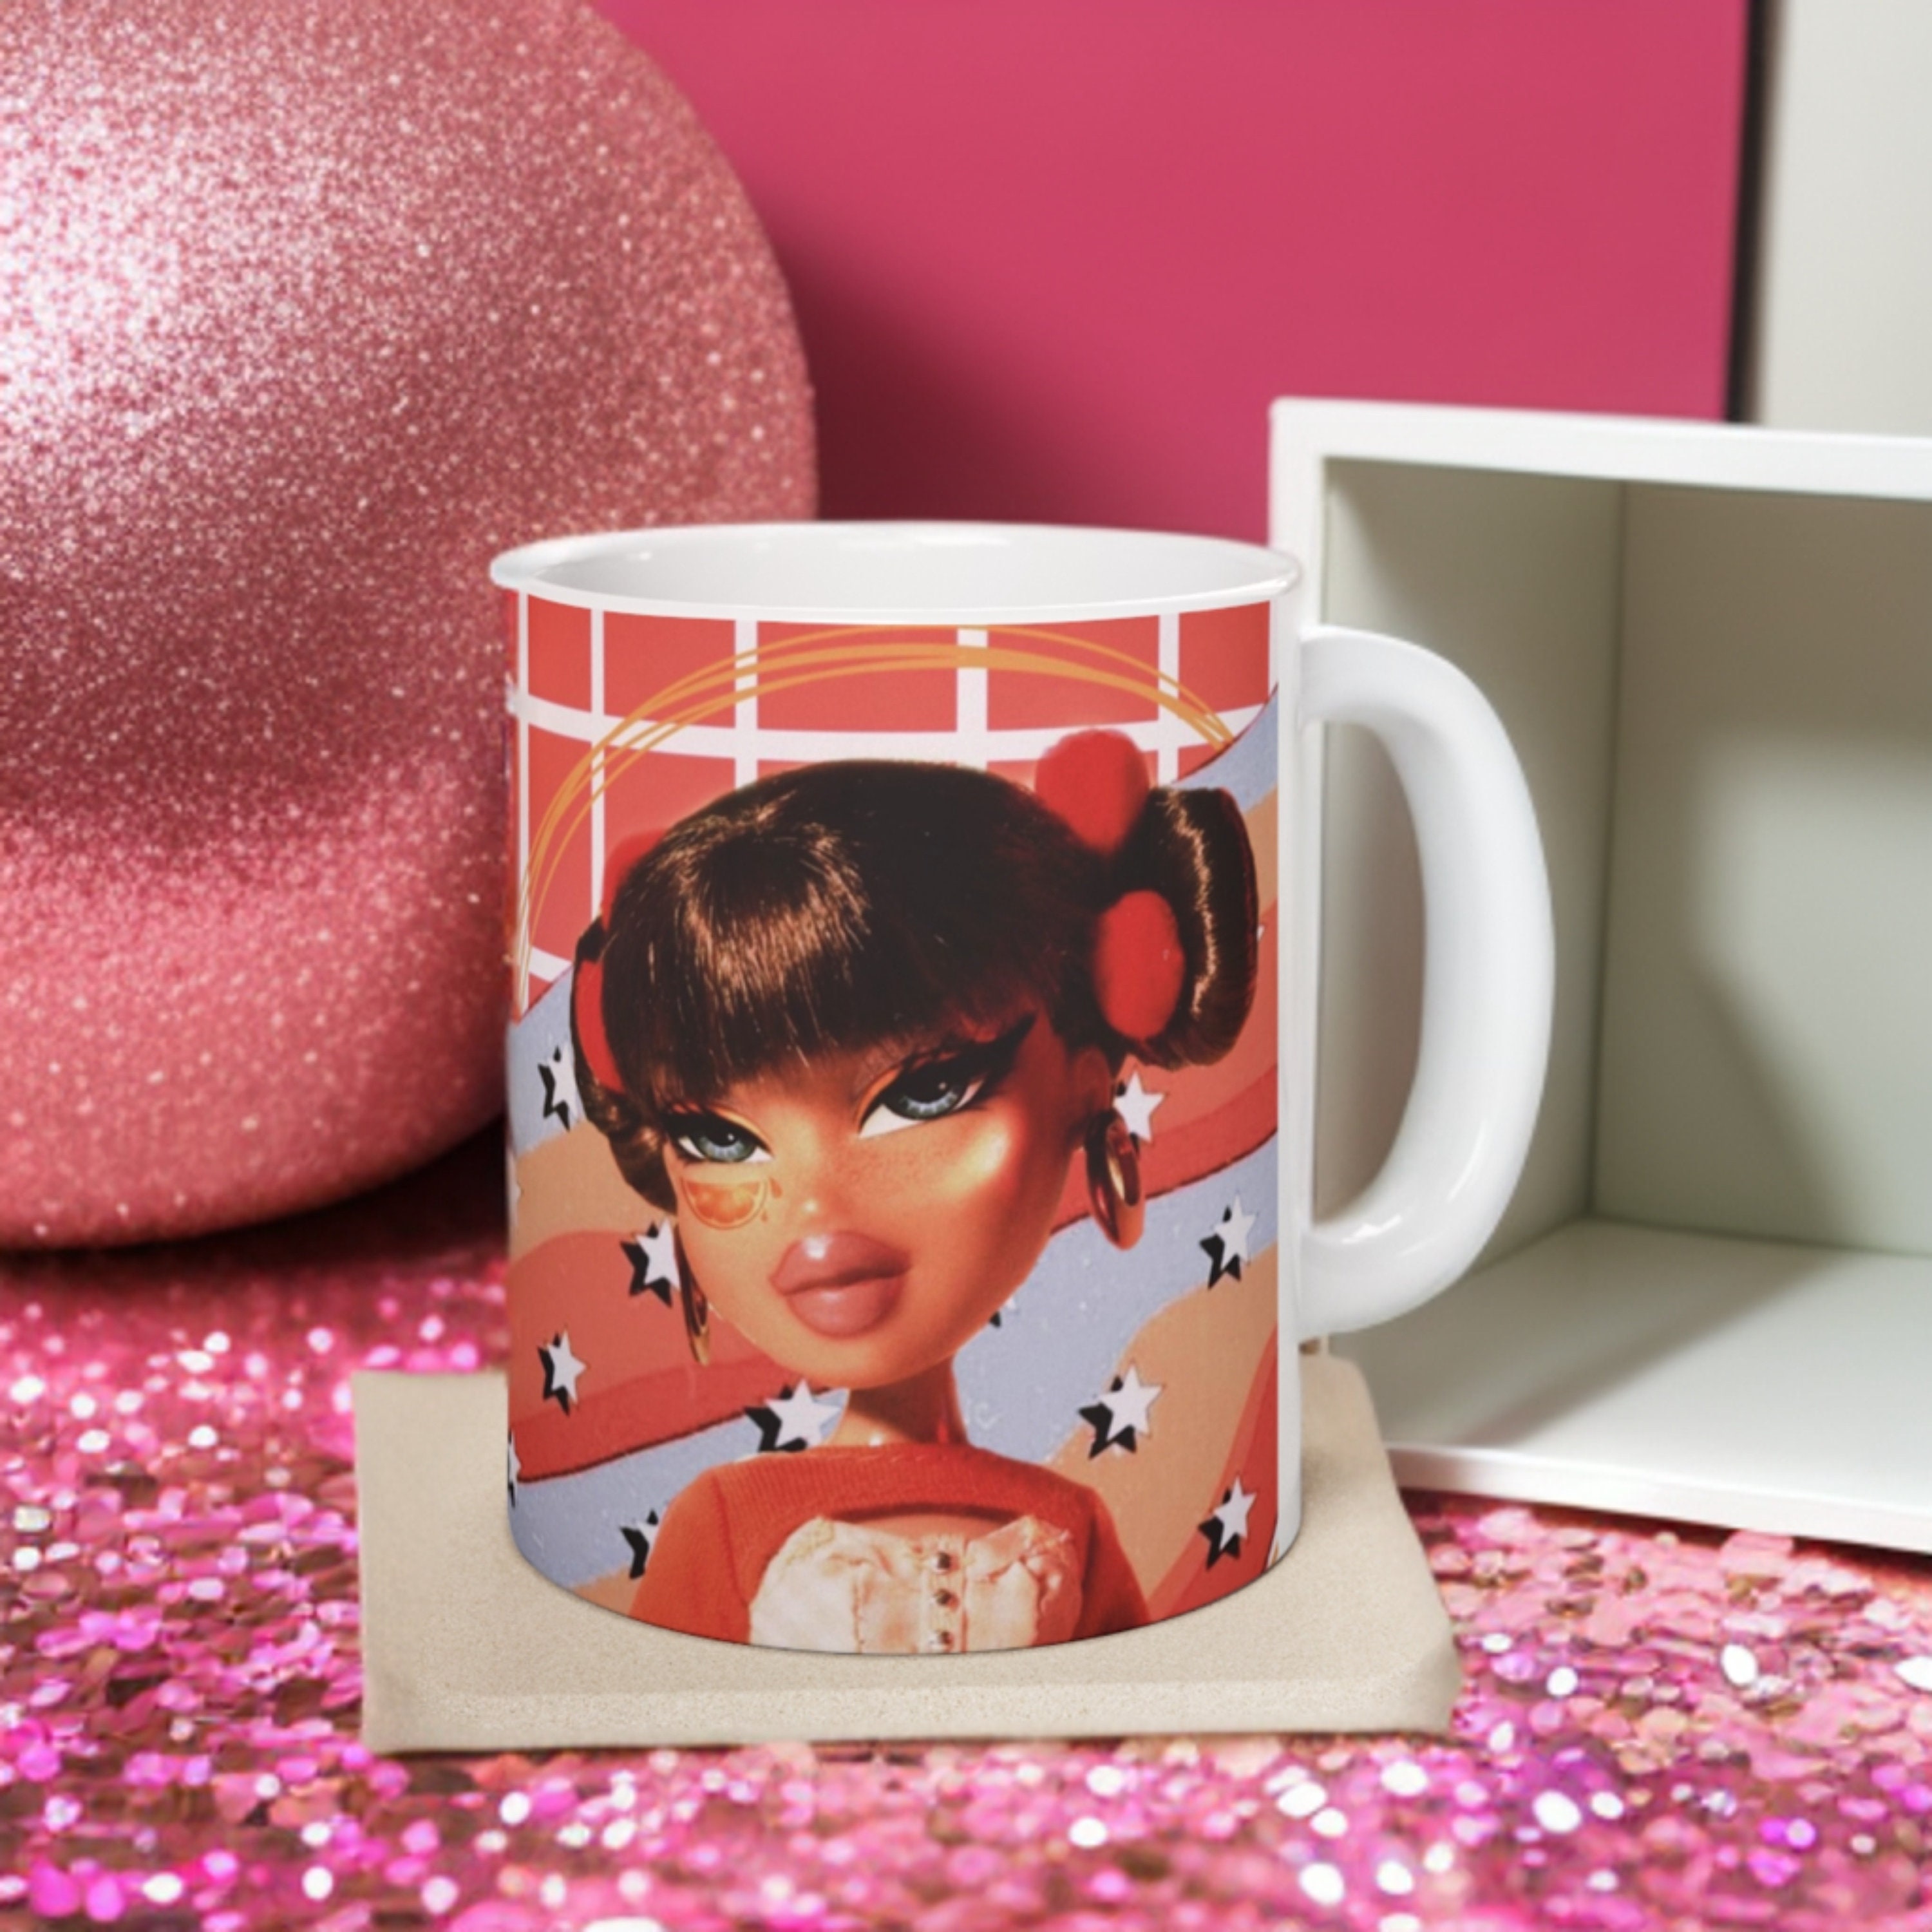 Ceramic Bratz 11oz Mug Ideal for Gifts of Any Occasion 